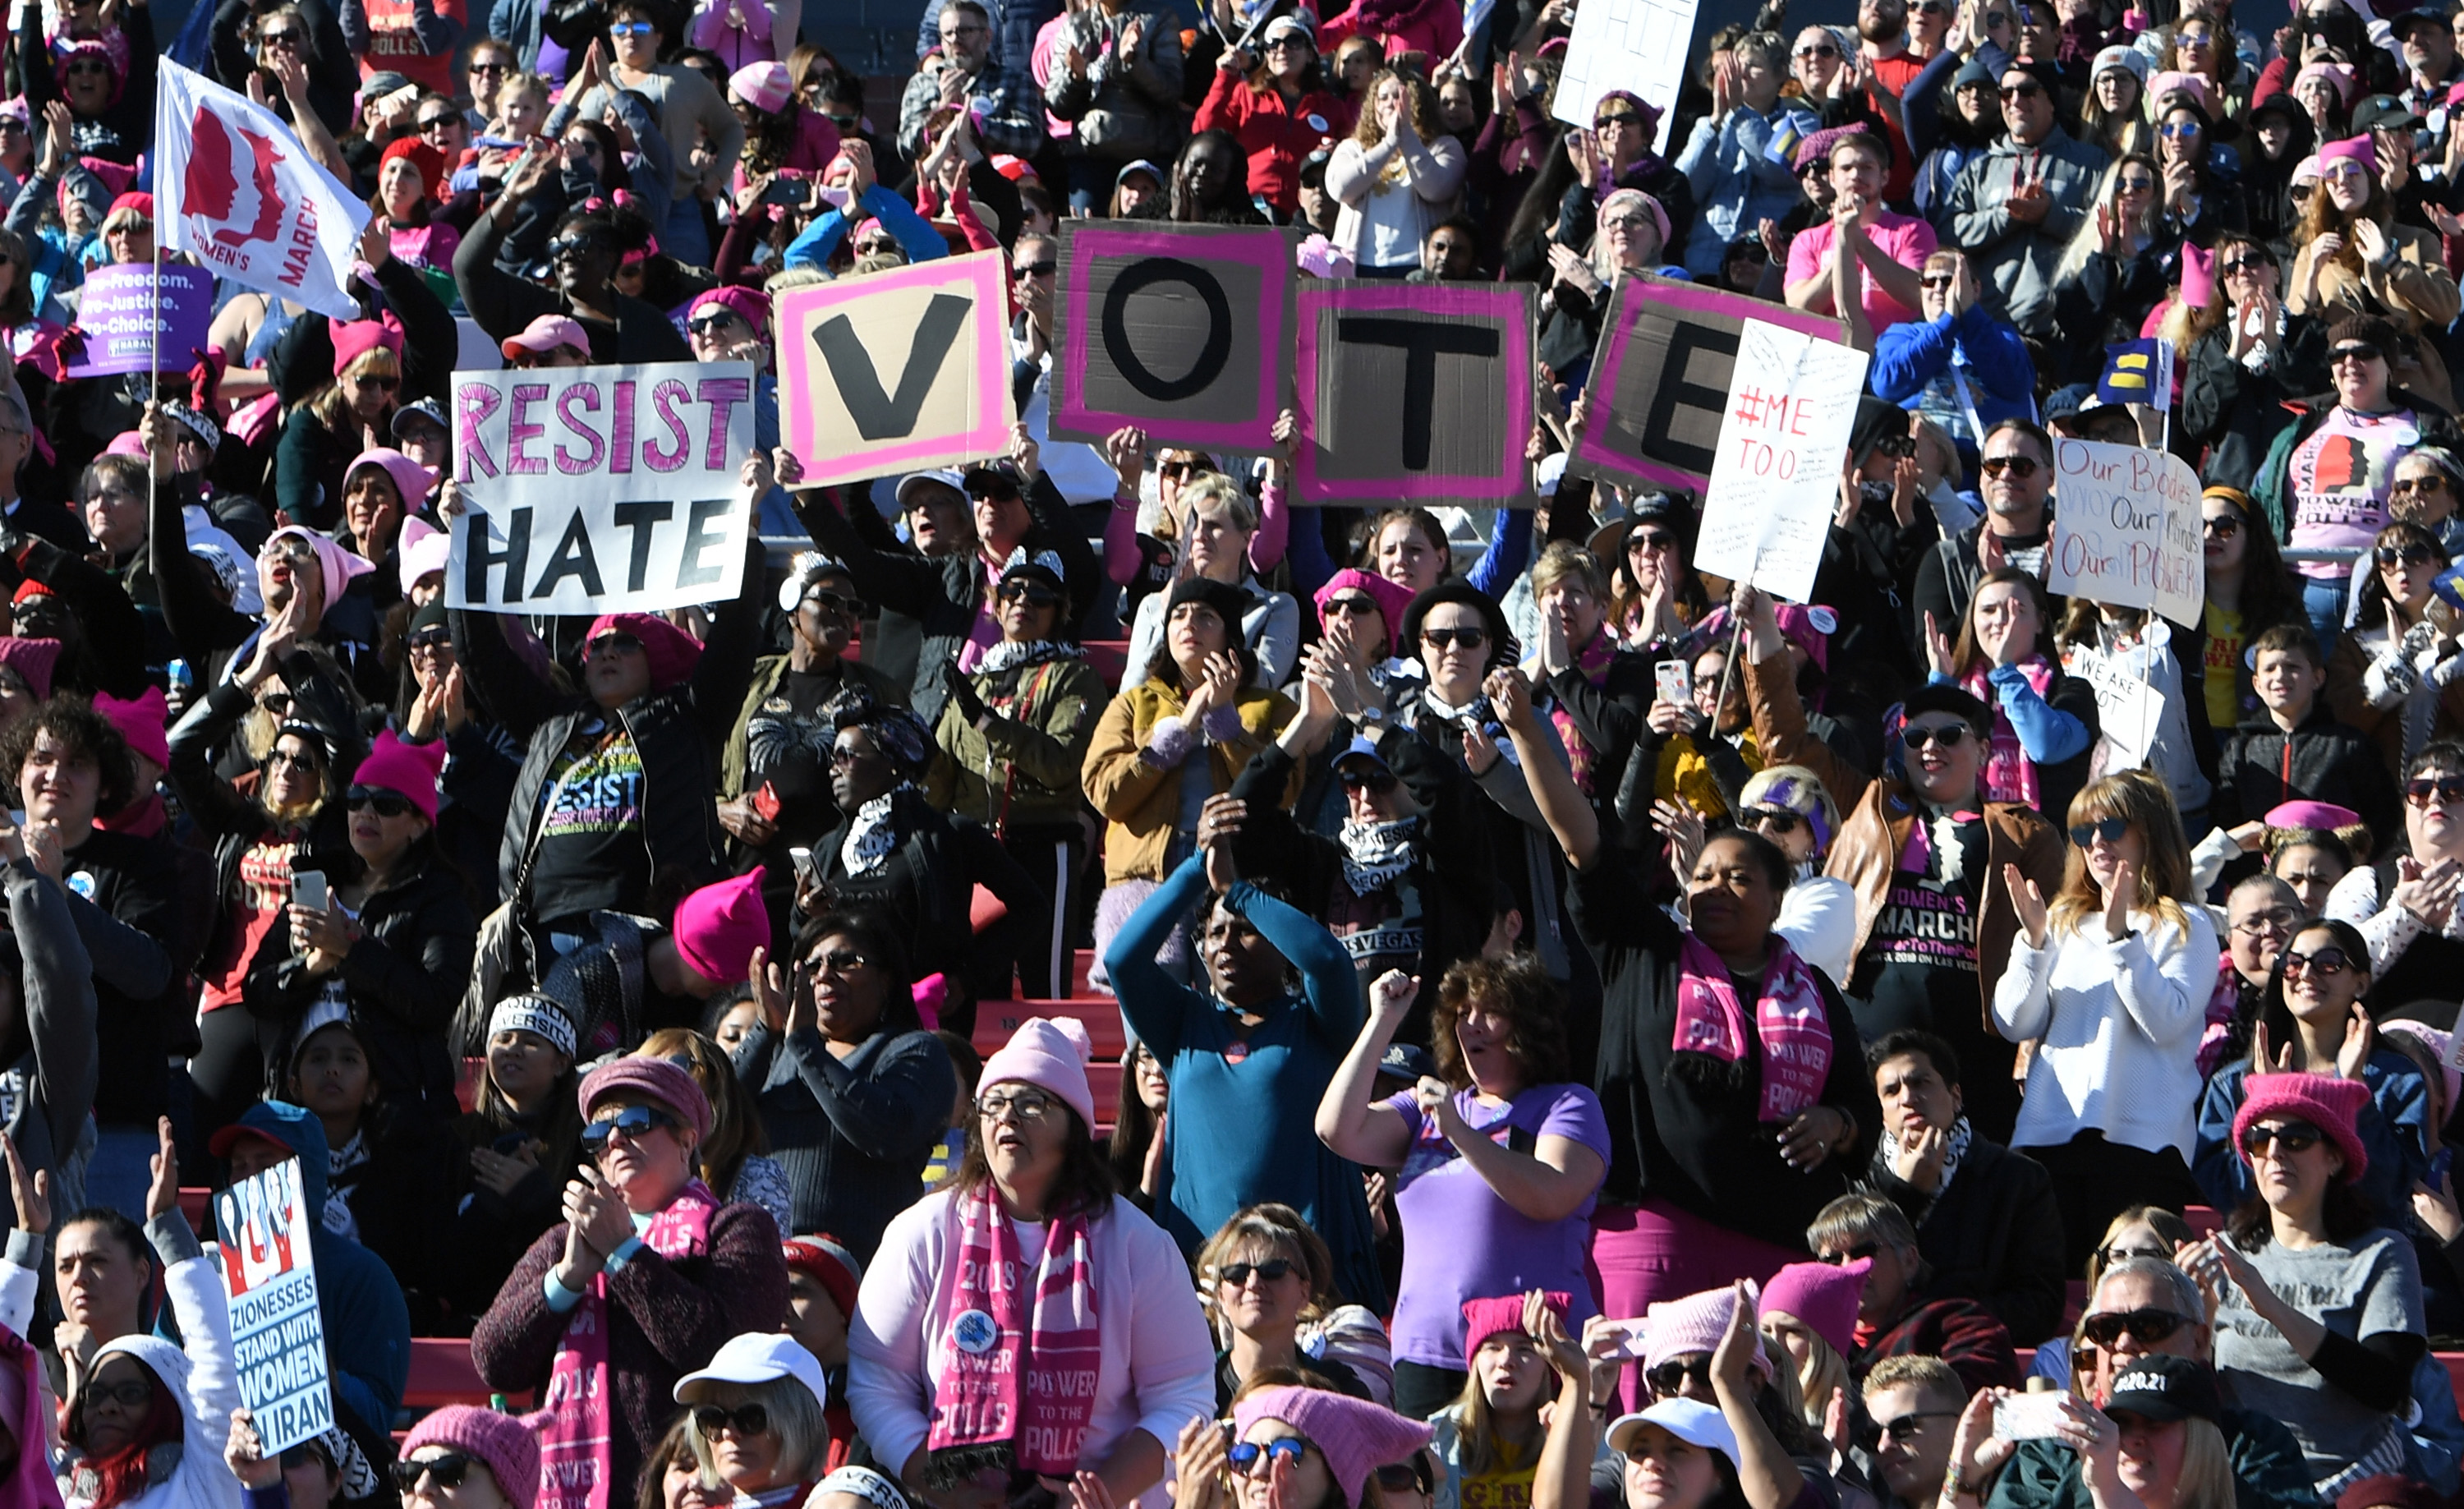 Demonstrators attend the Women's March "Power to the Polls" voter registration tour launch at Sam Boyd Stadium on January 21, 2018 in Las Vegas, Nevada. (Ethan Miller—Getty Images)